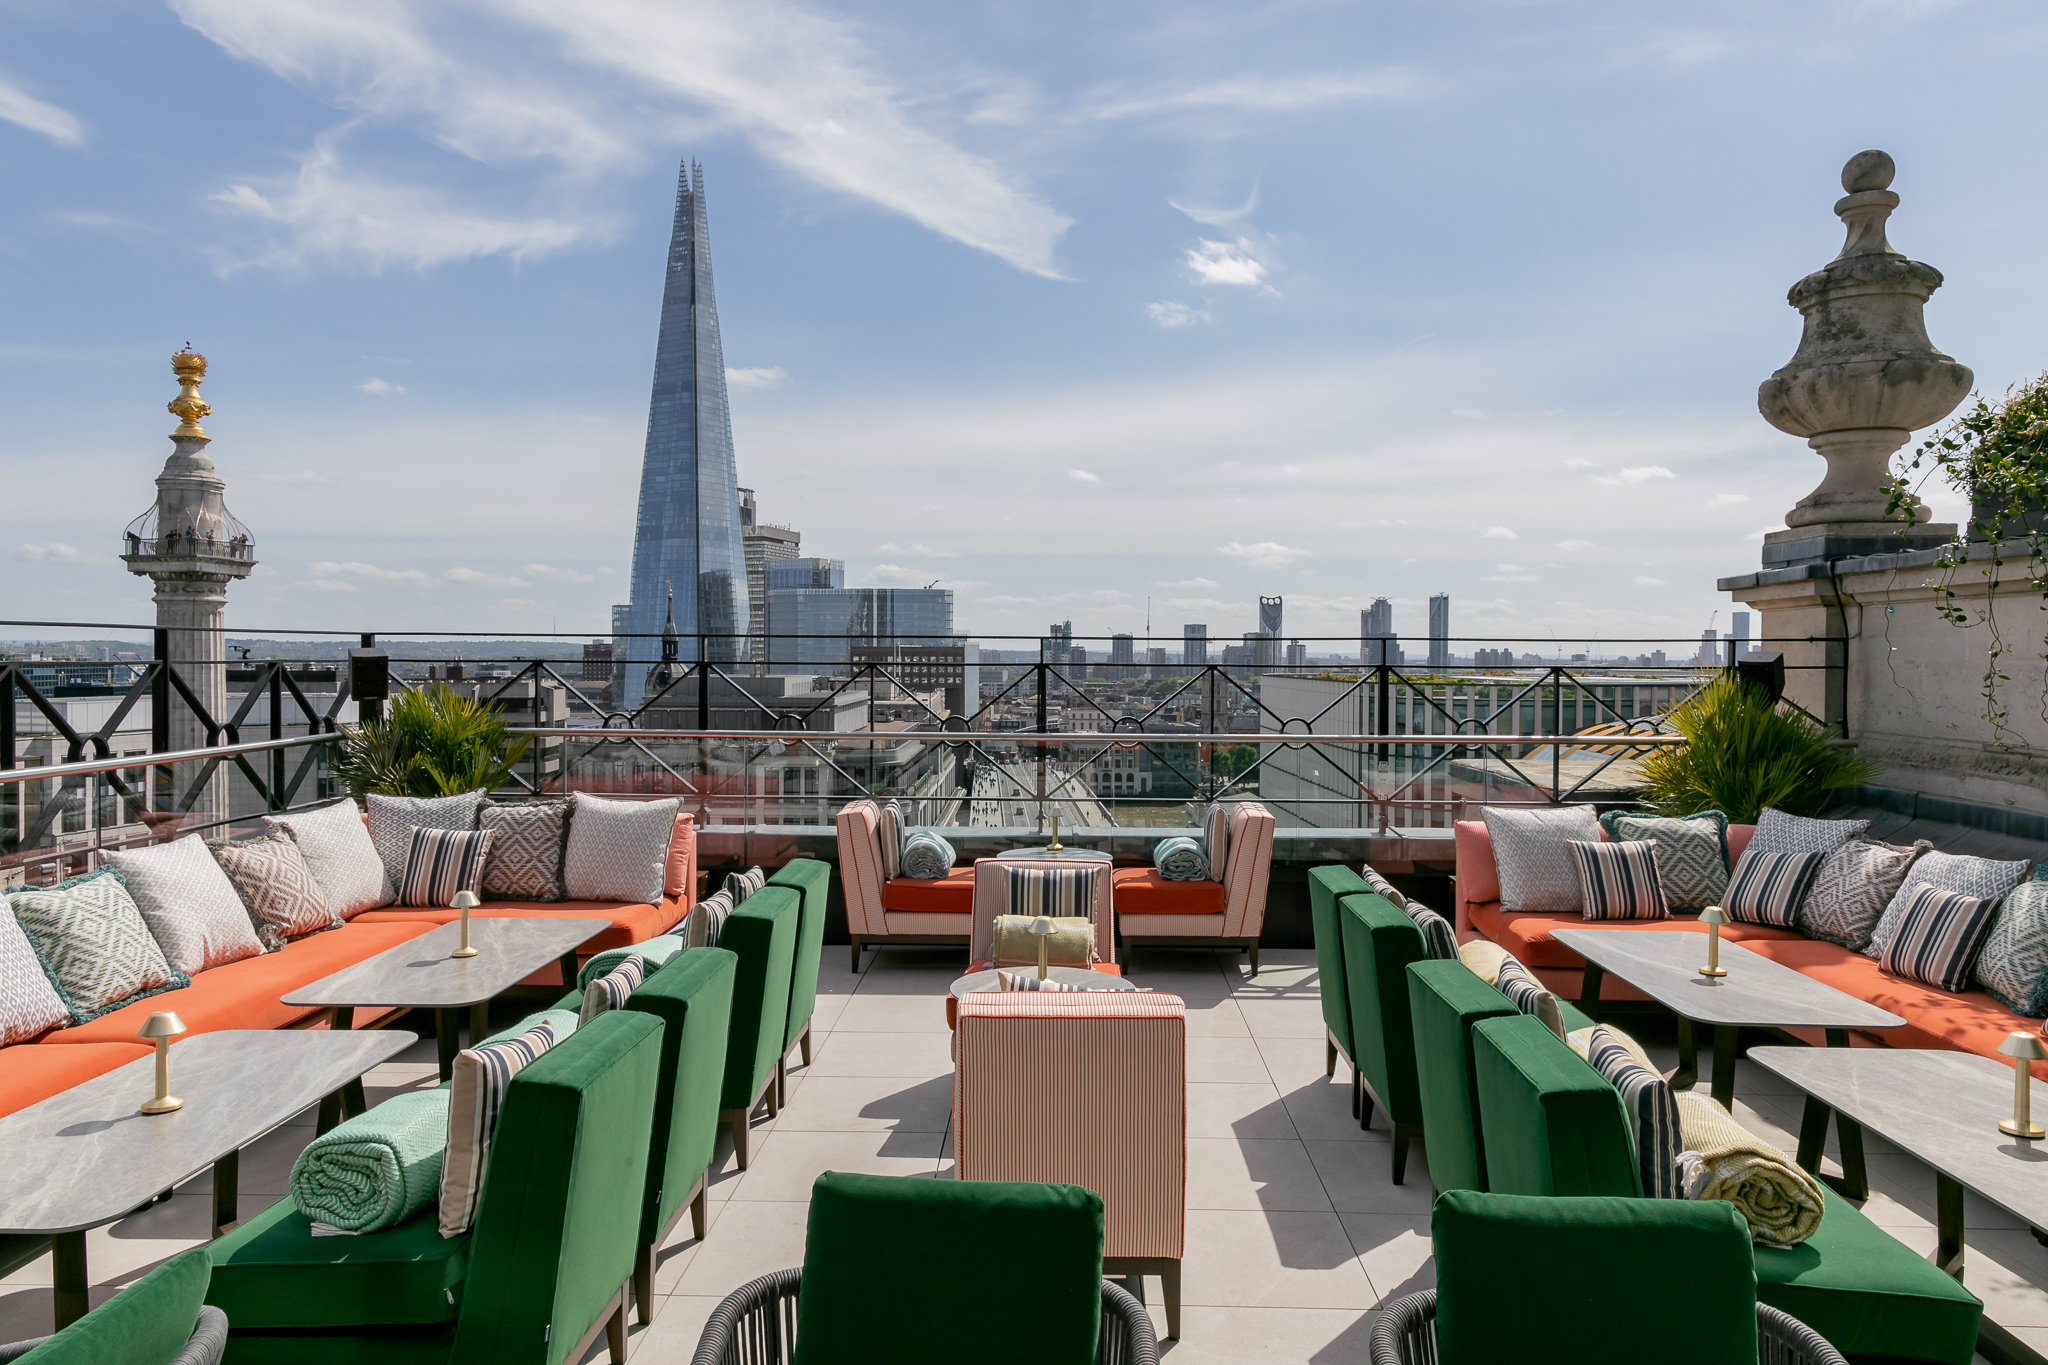 The scenic views of London from the rooftop restaurant at Wagtail.